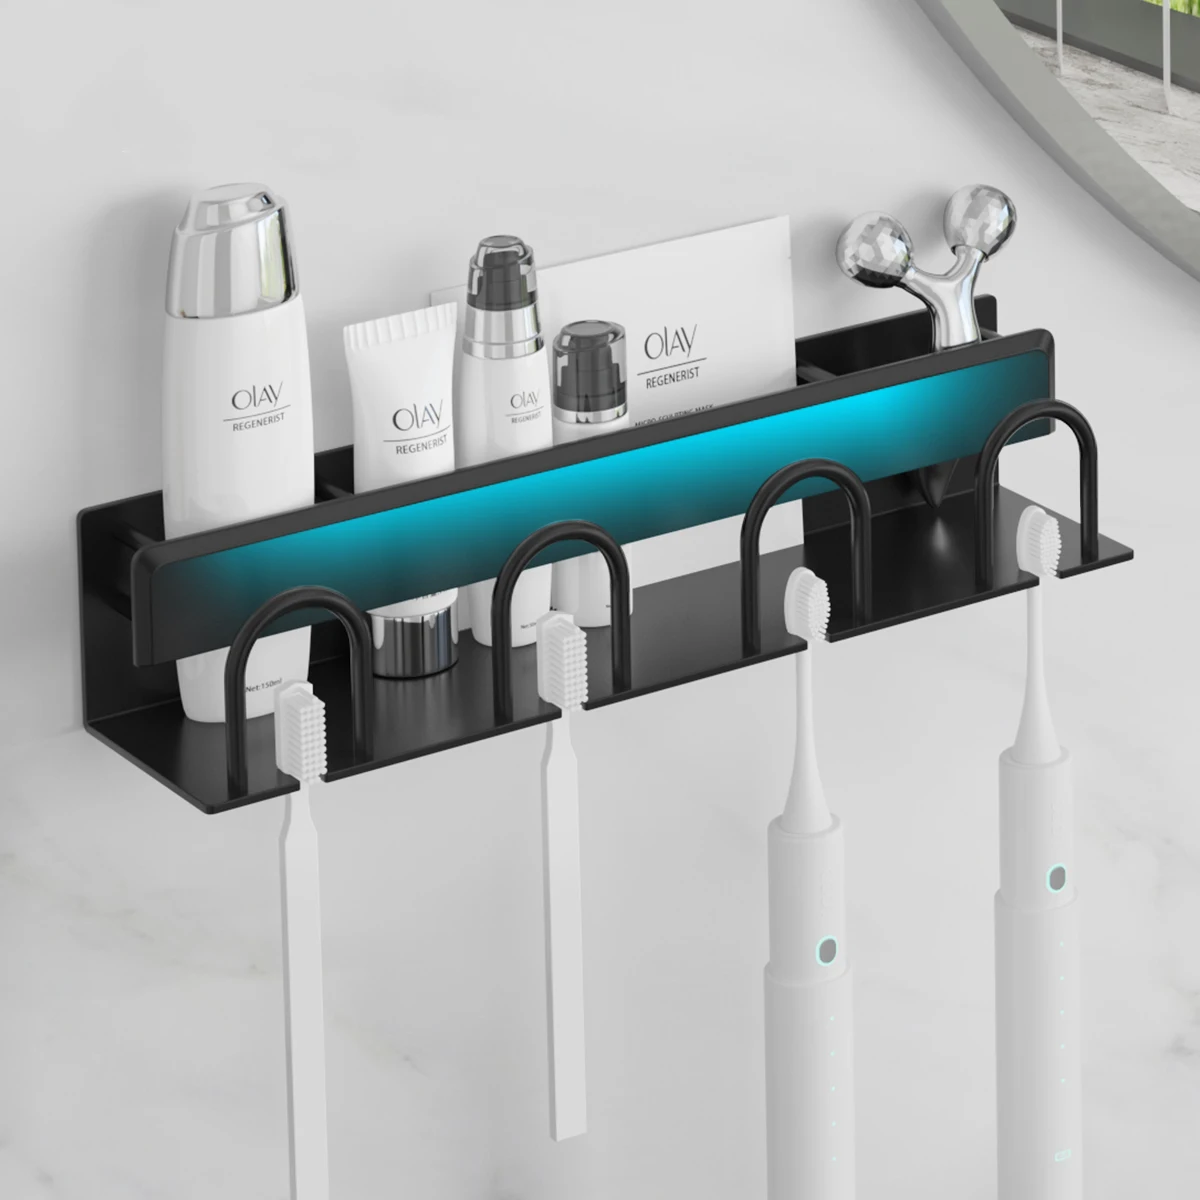 Hot Selling Simple Bathroom Toothbrush Holder Wall Mounted Family Aluminum Toothbrush Cup Holder